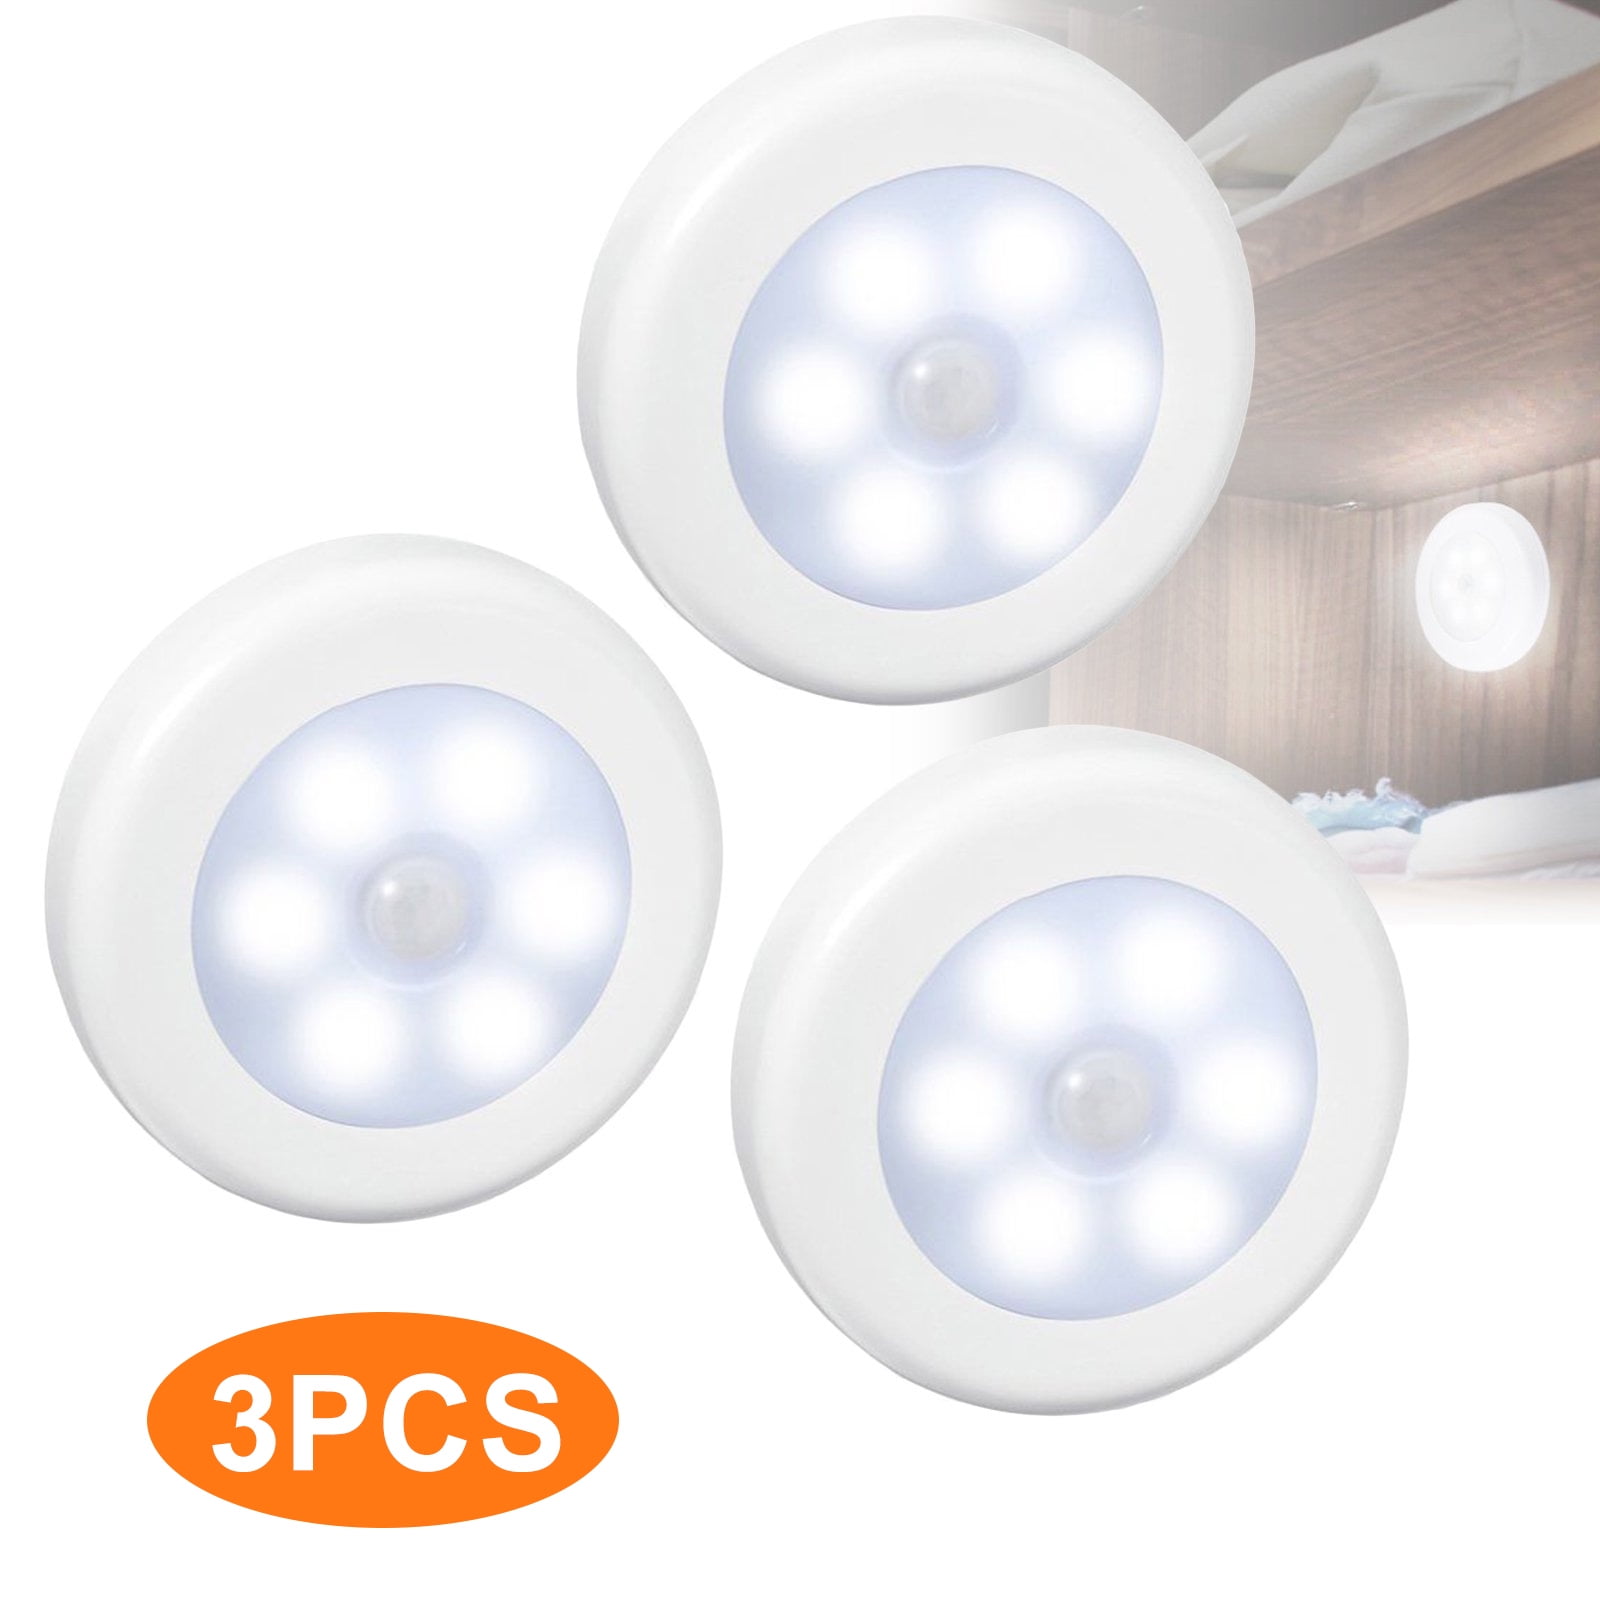 Details about   Recharge Wireless PIR Motion Sensor LED Night Light Lamp Wall Wardrobe Dimmable 